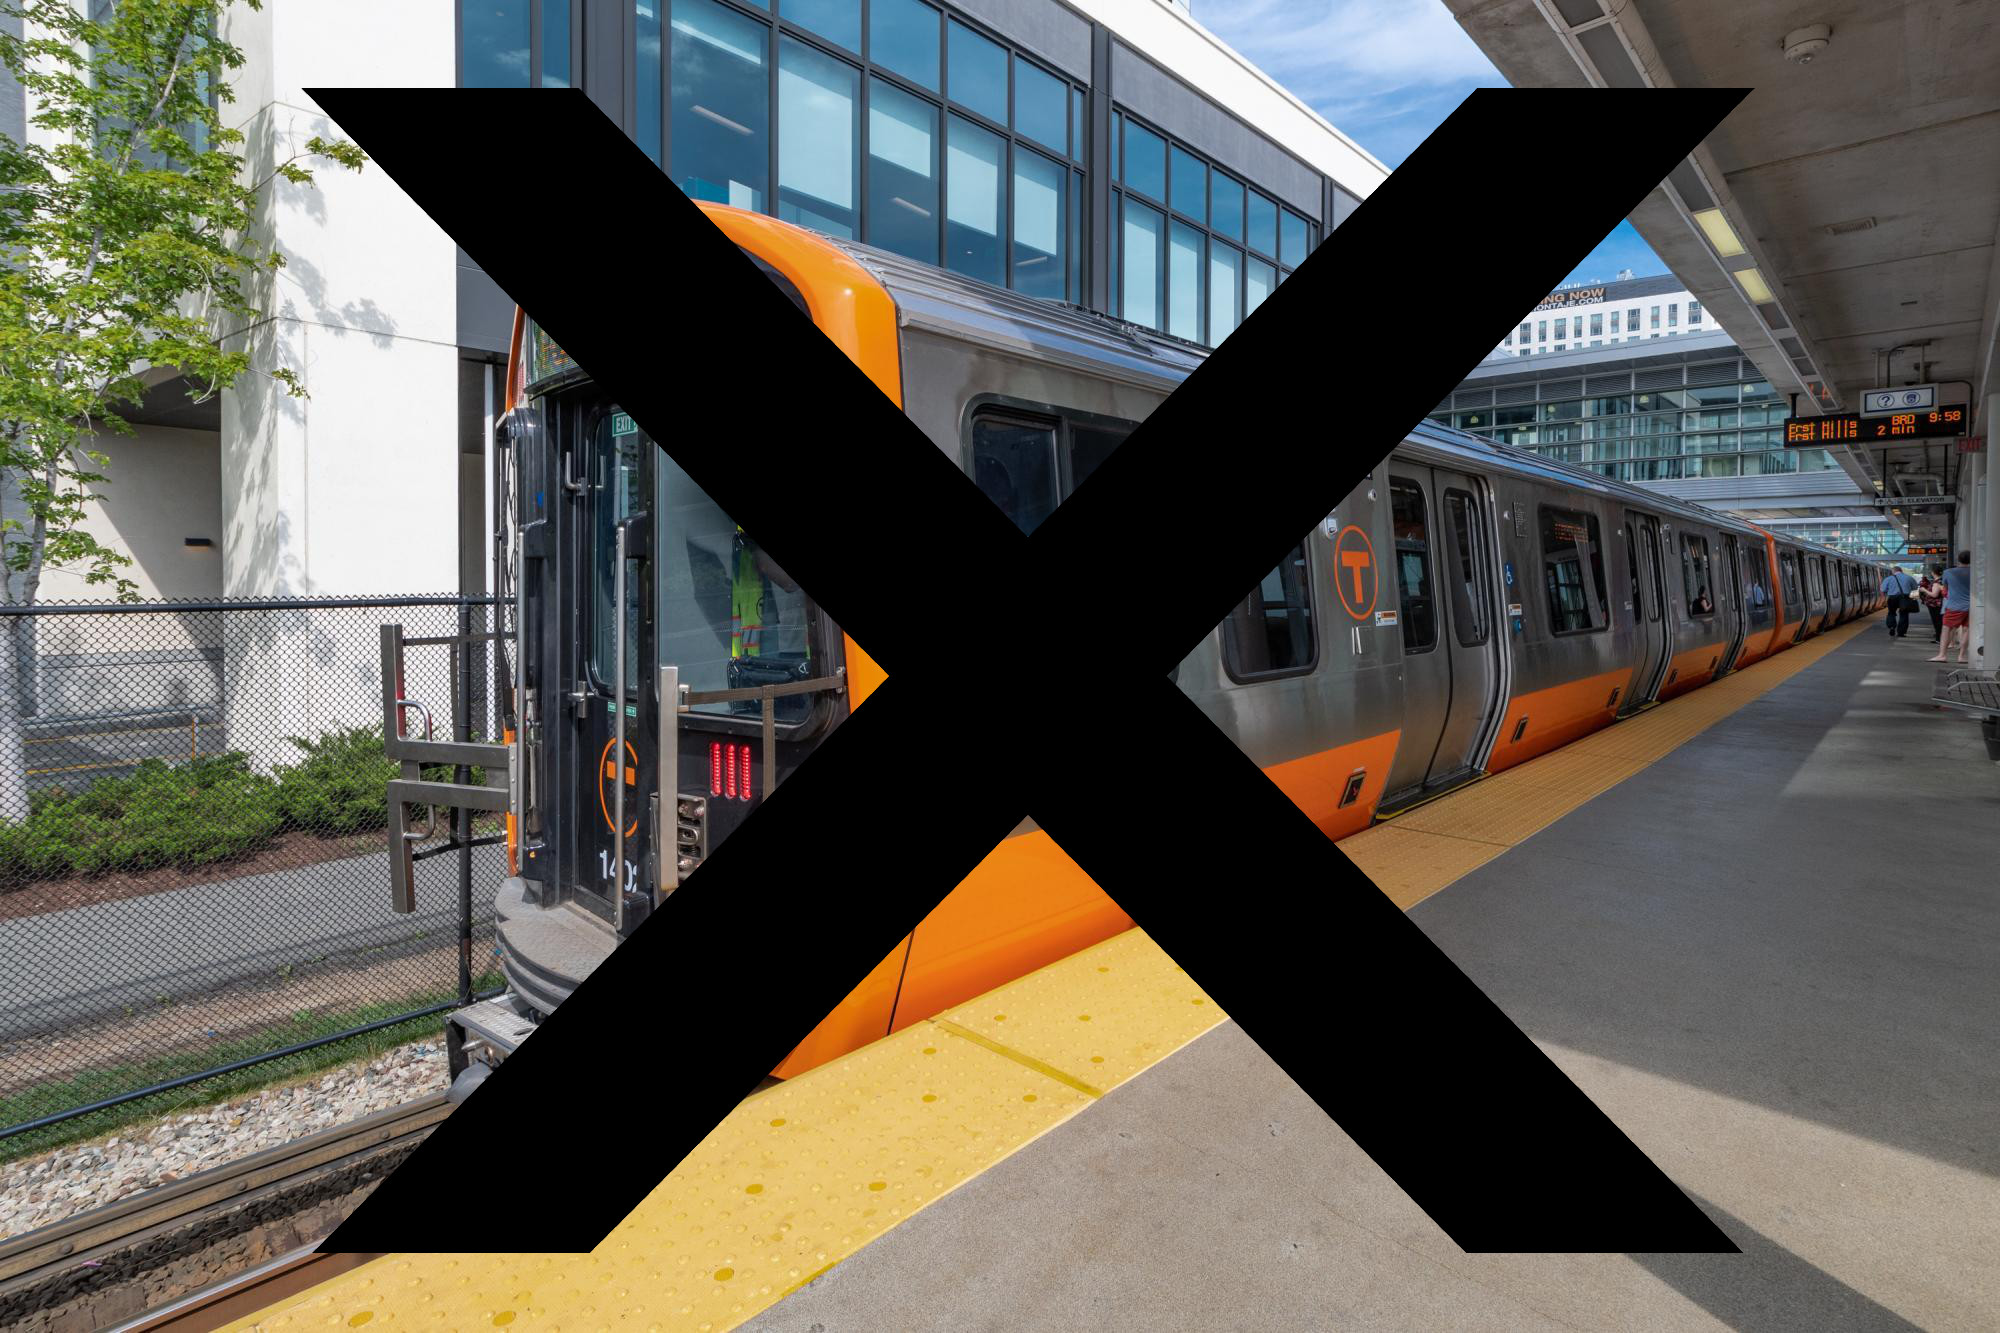 An illustration of a new Orange Line train with a large X through it